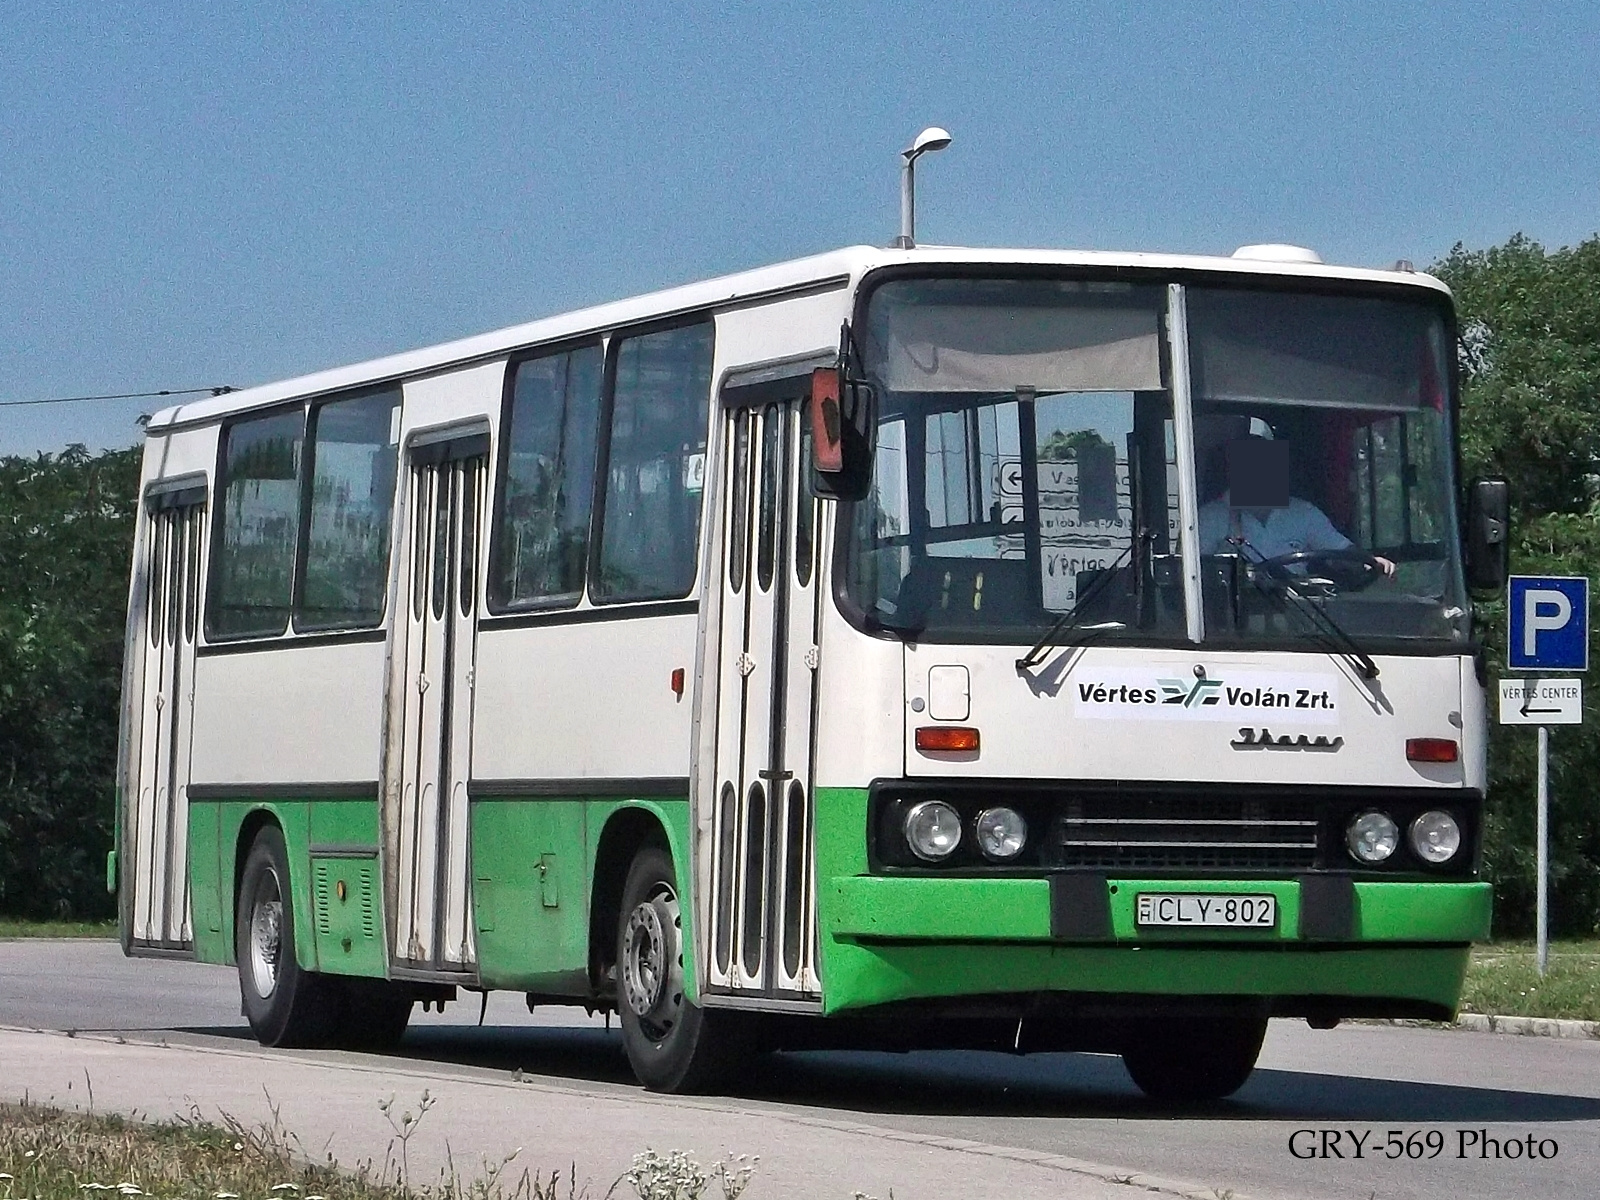 CLY-802